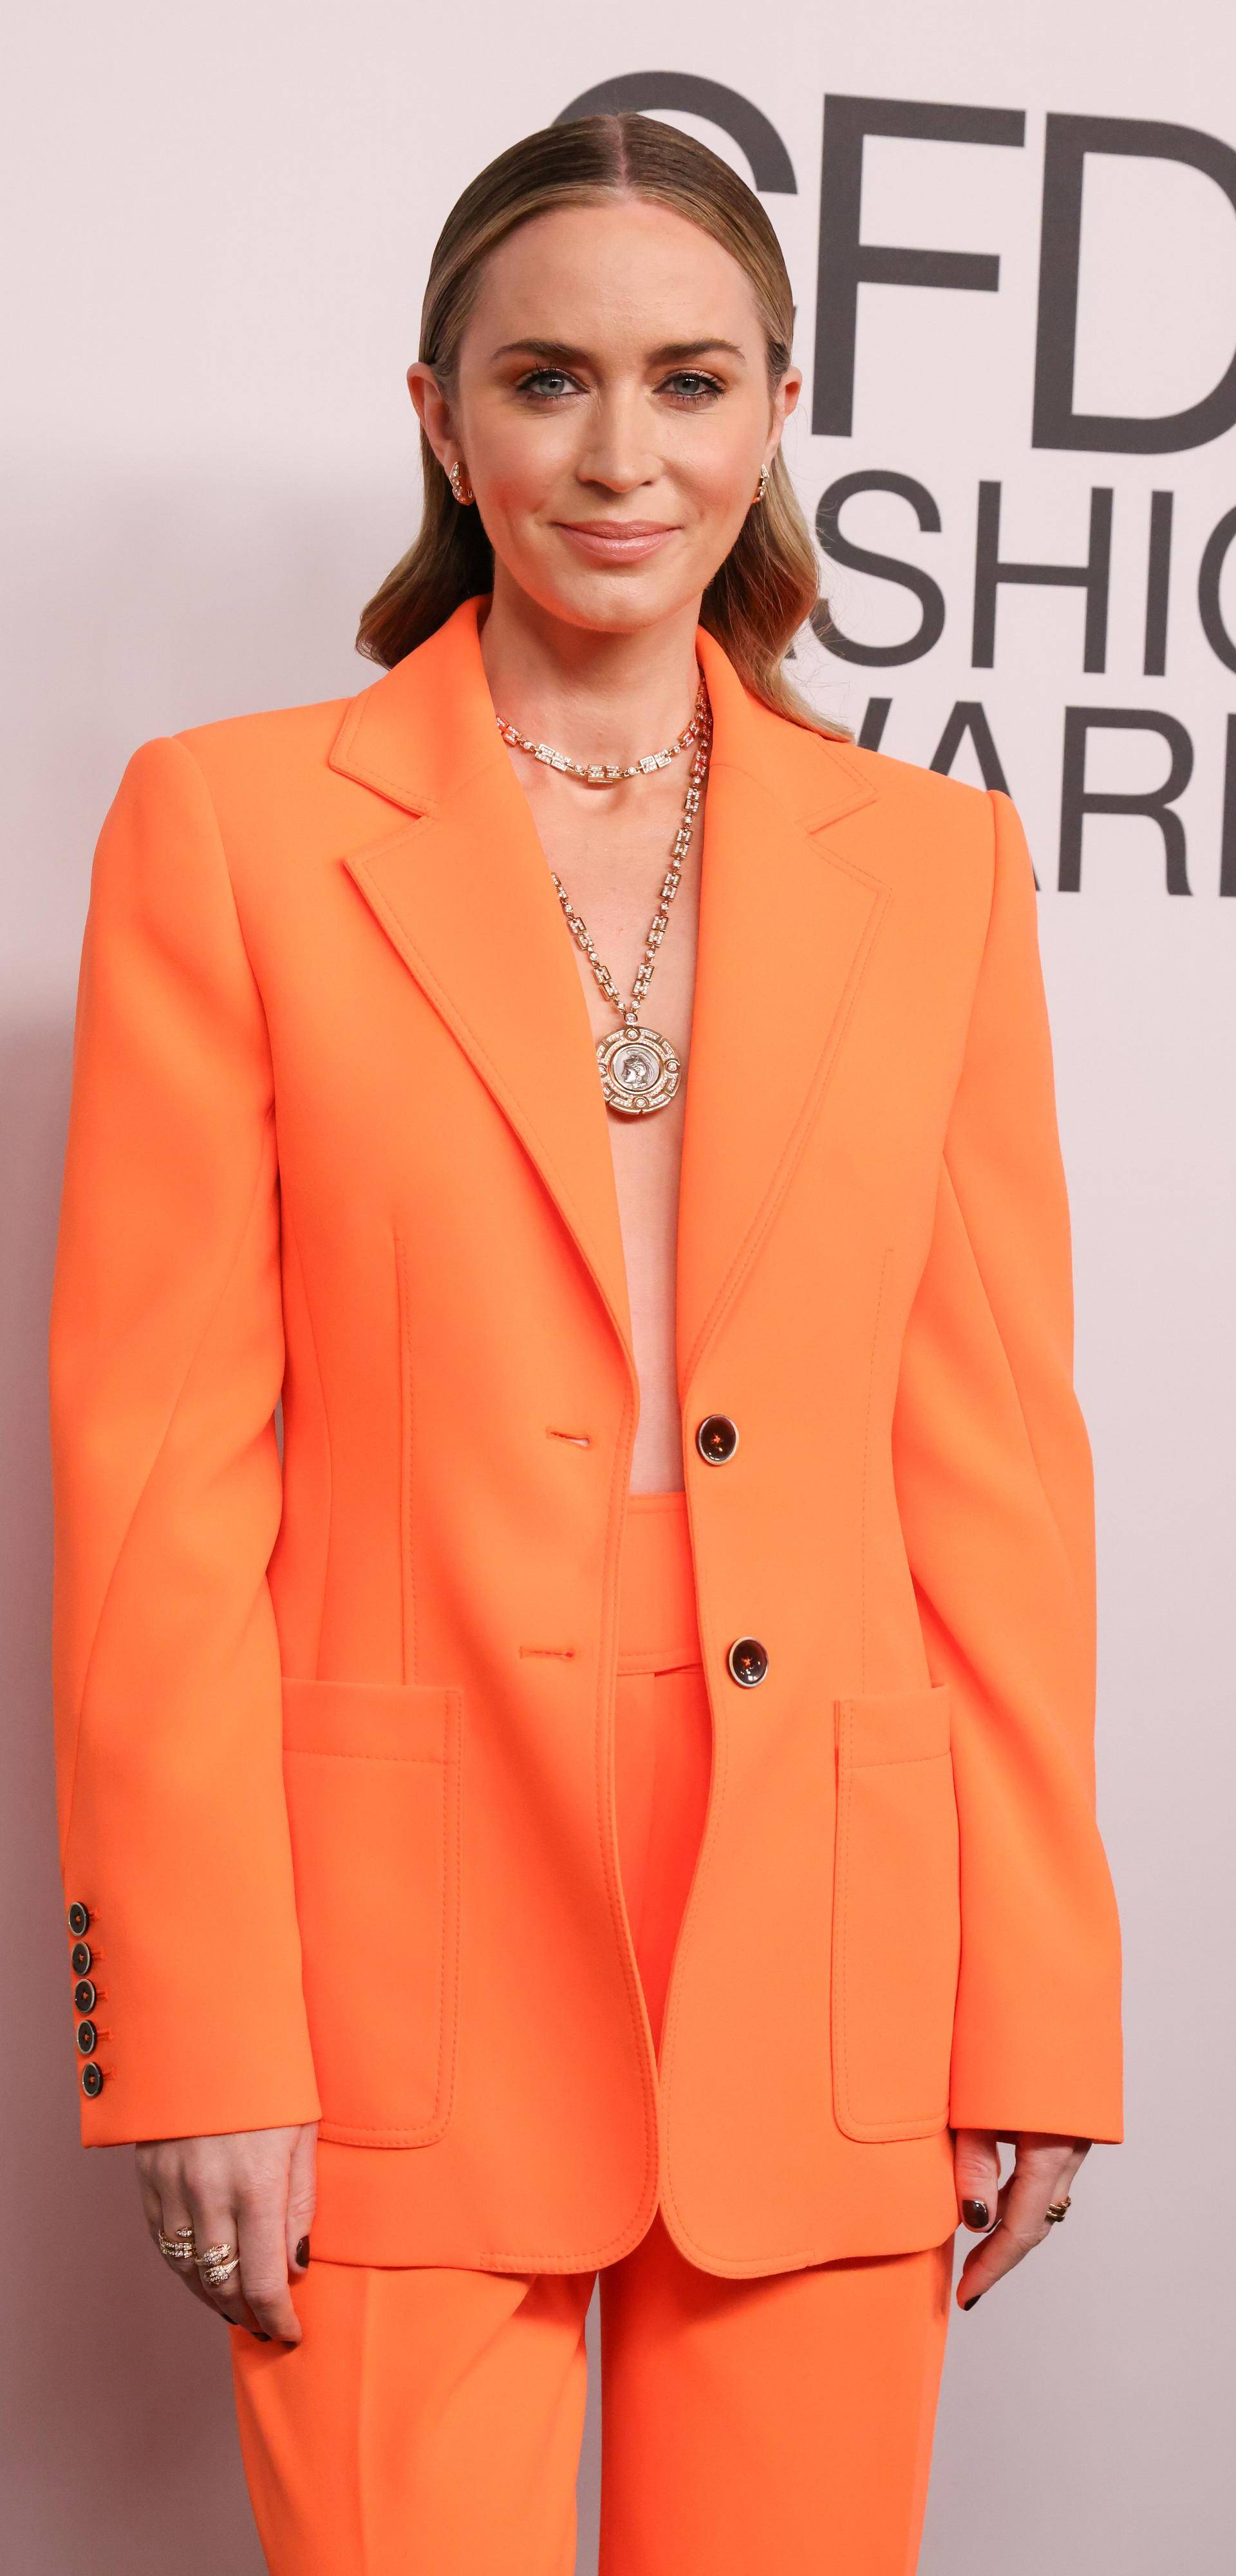 Emily Blunt poses on the carpet at the 2021 CFDA Awards in New York